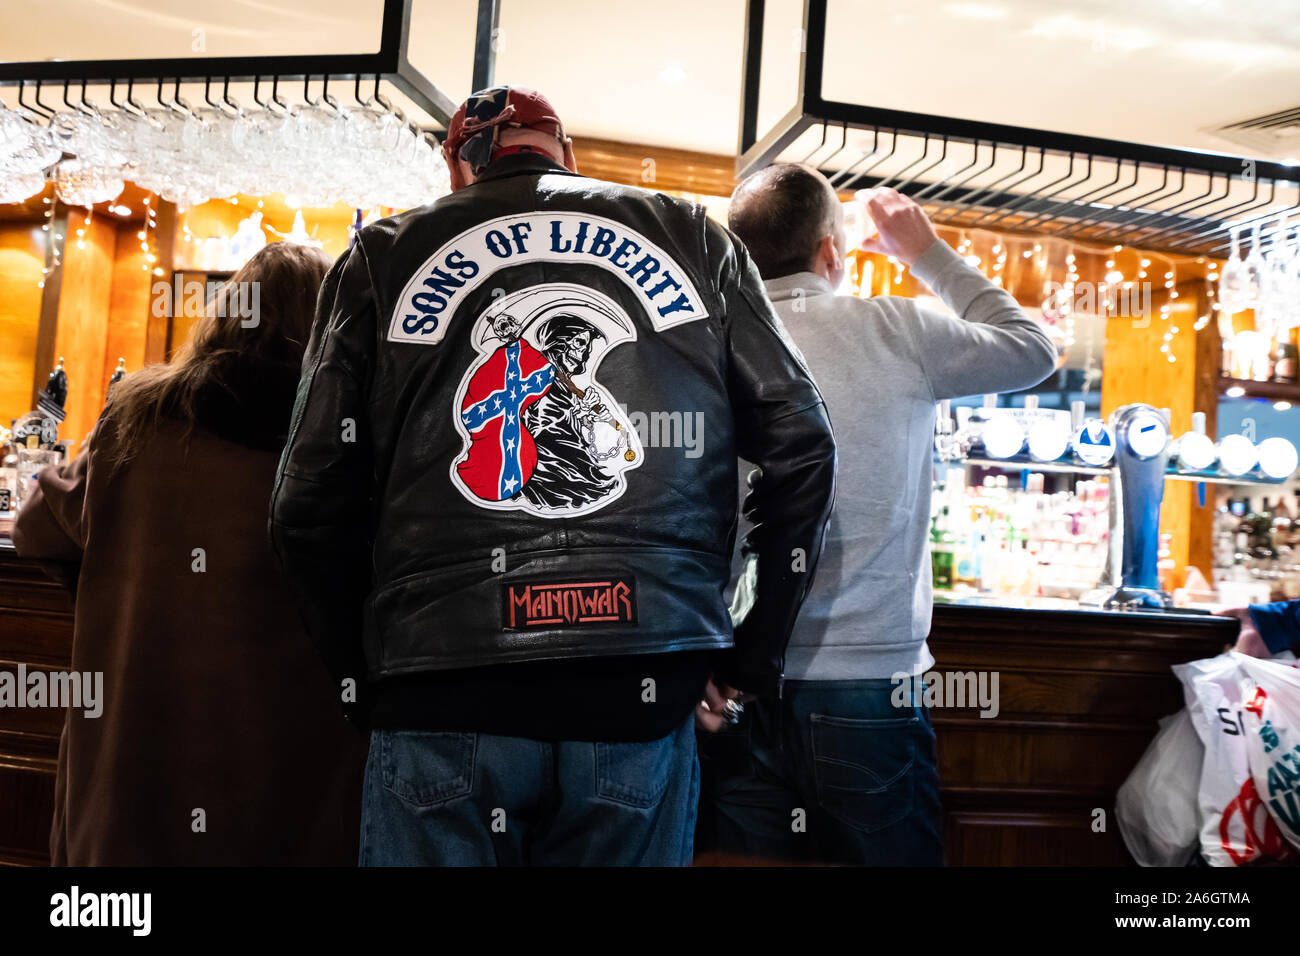 A man wearing a bikers jacket, gang related clothing queuing at the bar of the Reginald Mitchell, Wetherspoons public house Stock Photo